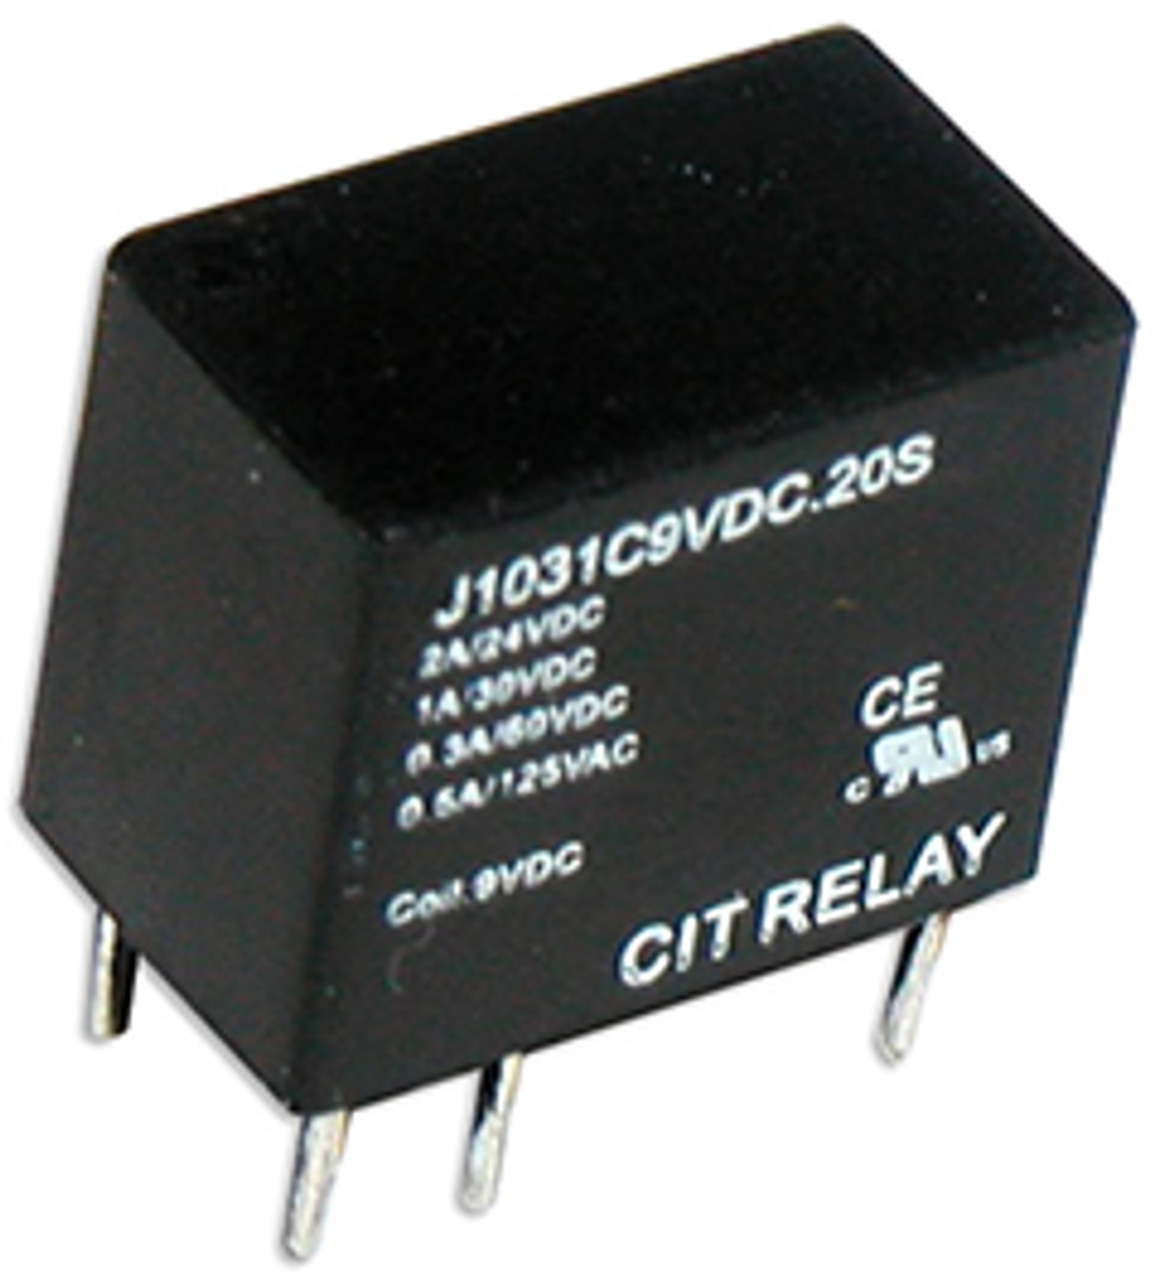 CIT Relay and Switch J1031C12VDC.20S Signal Relays